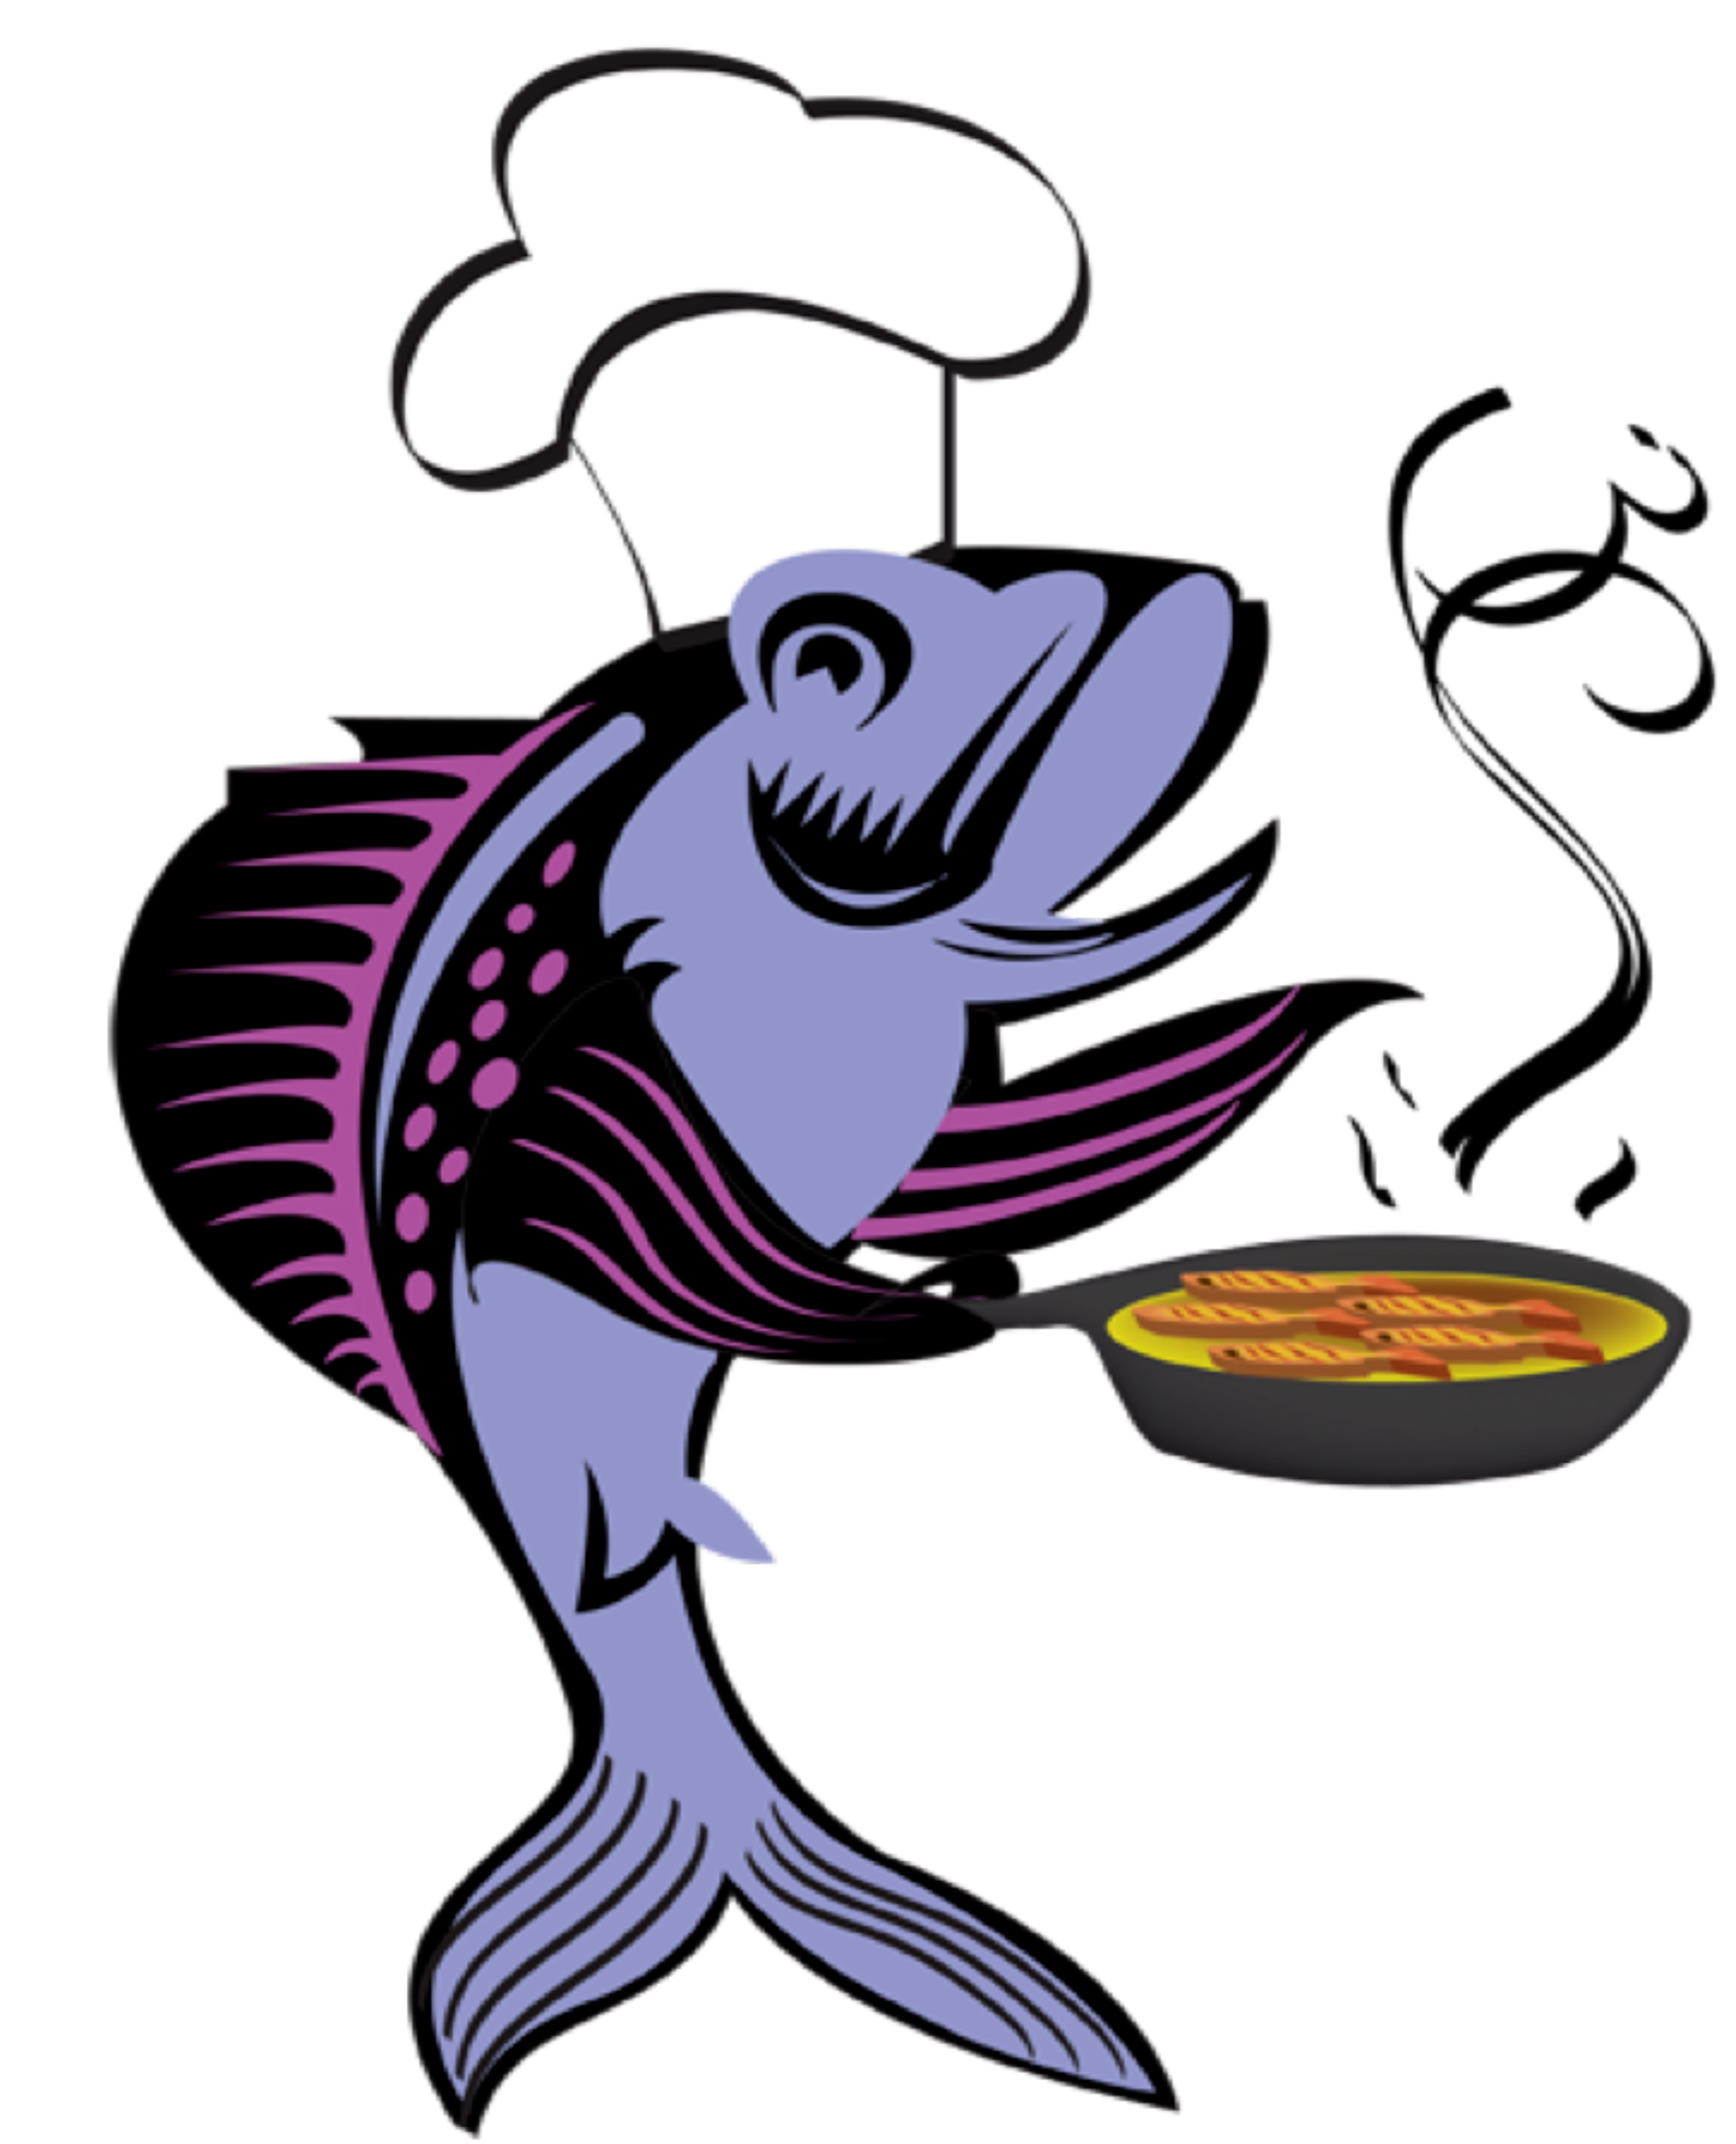 Displaying fish fry clipart f